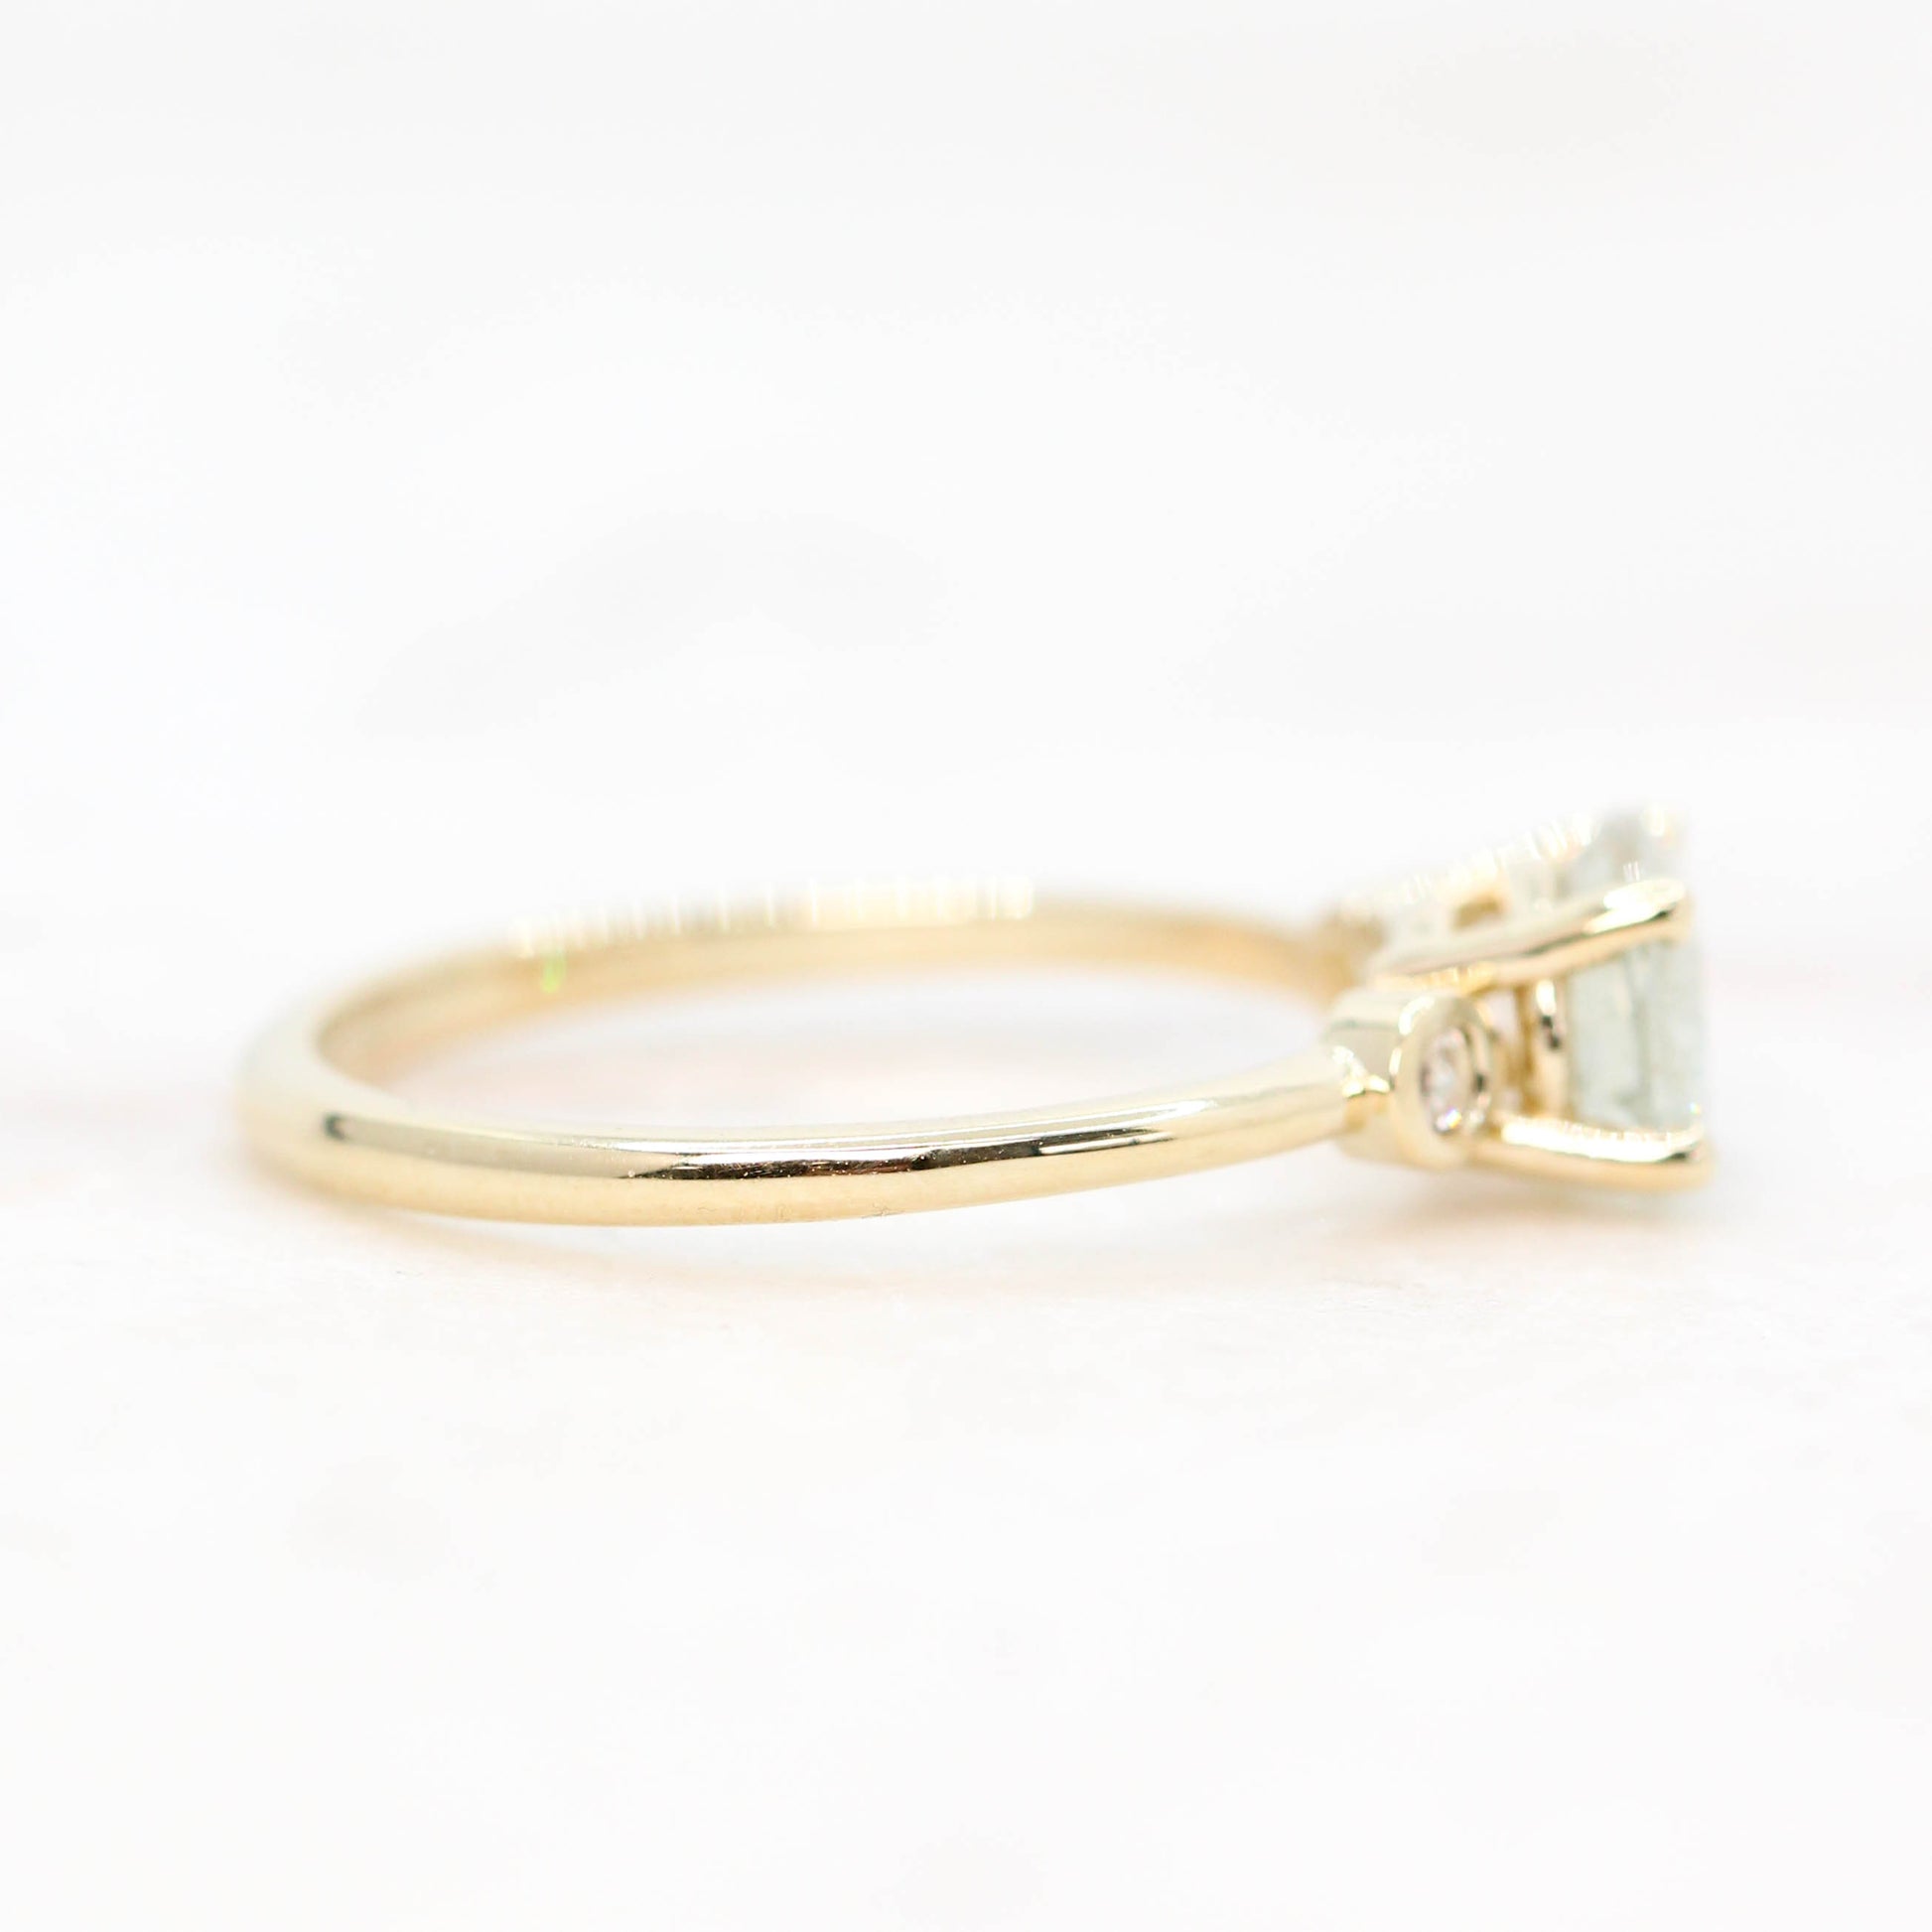 CAELEN (J) Logan Ring with a 1.35 Carat Clear Gray Sapphire and Clear White Rose Cut Accent Diamonds in 14k Yellow Gold - Ready to Size and Ship - Midwinter Co. Alternative Bridal Rings and Modern Fine Jewelry